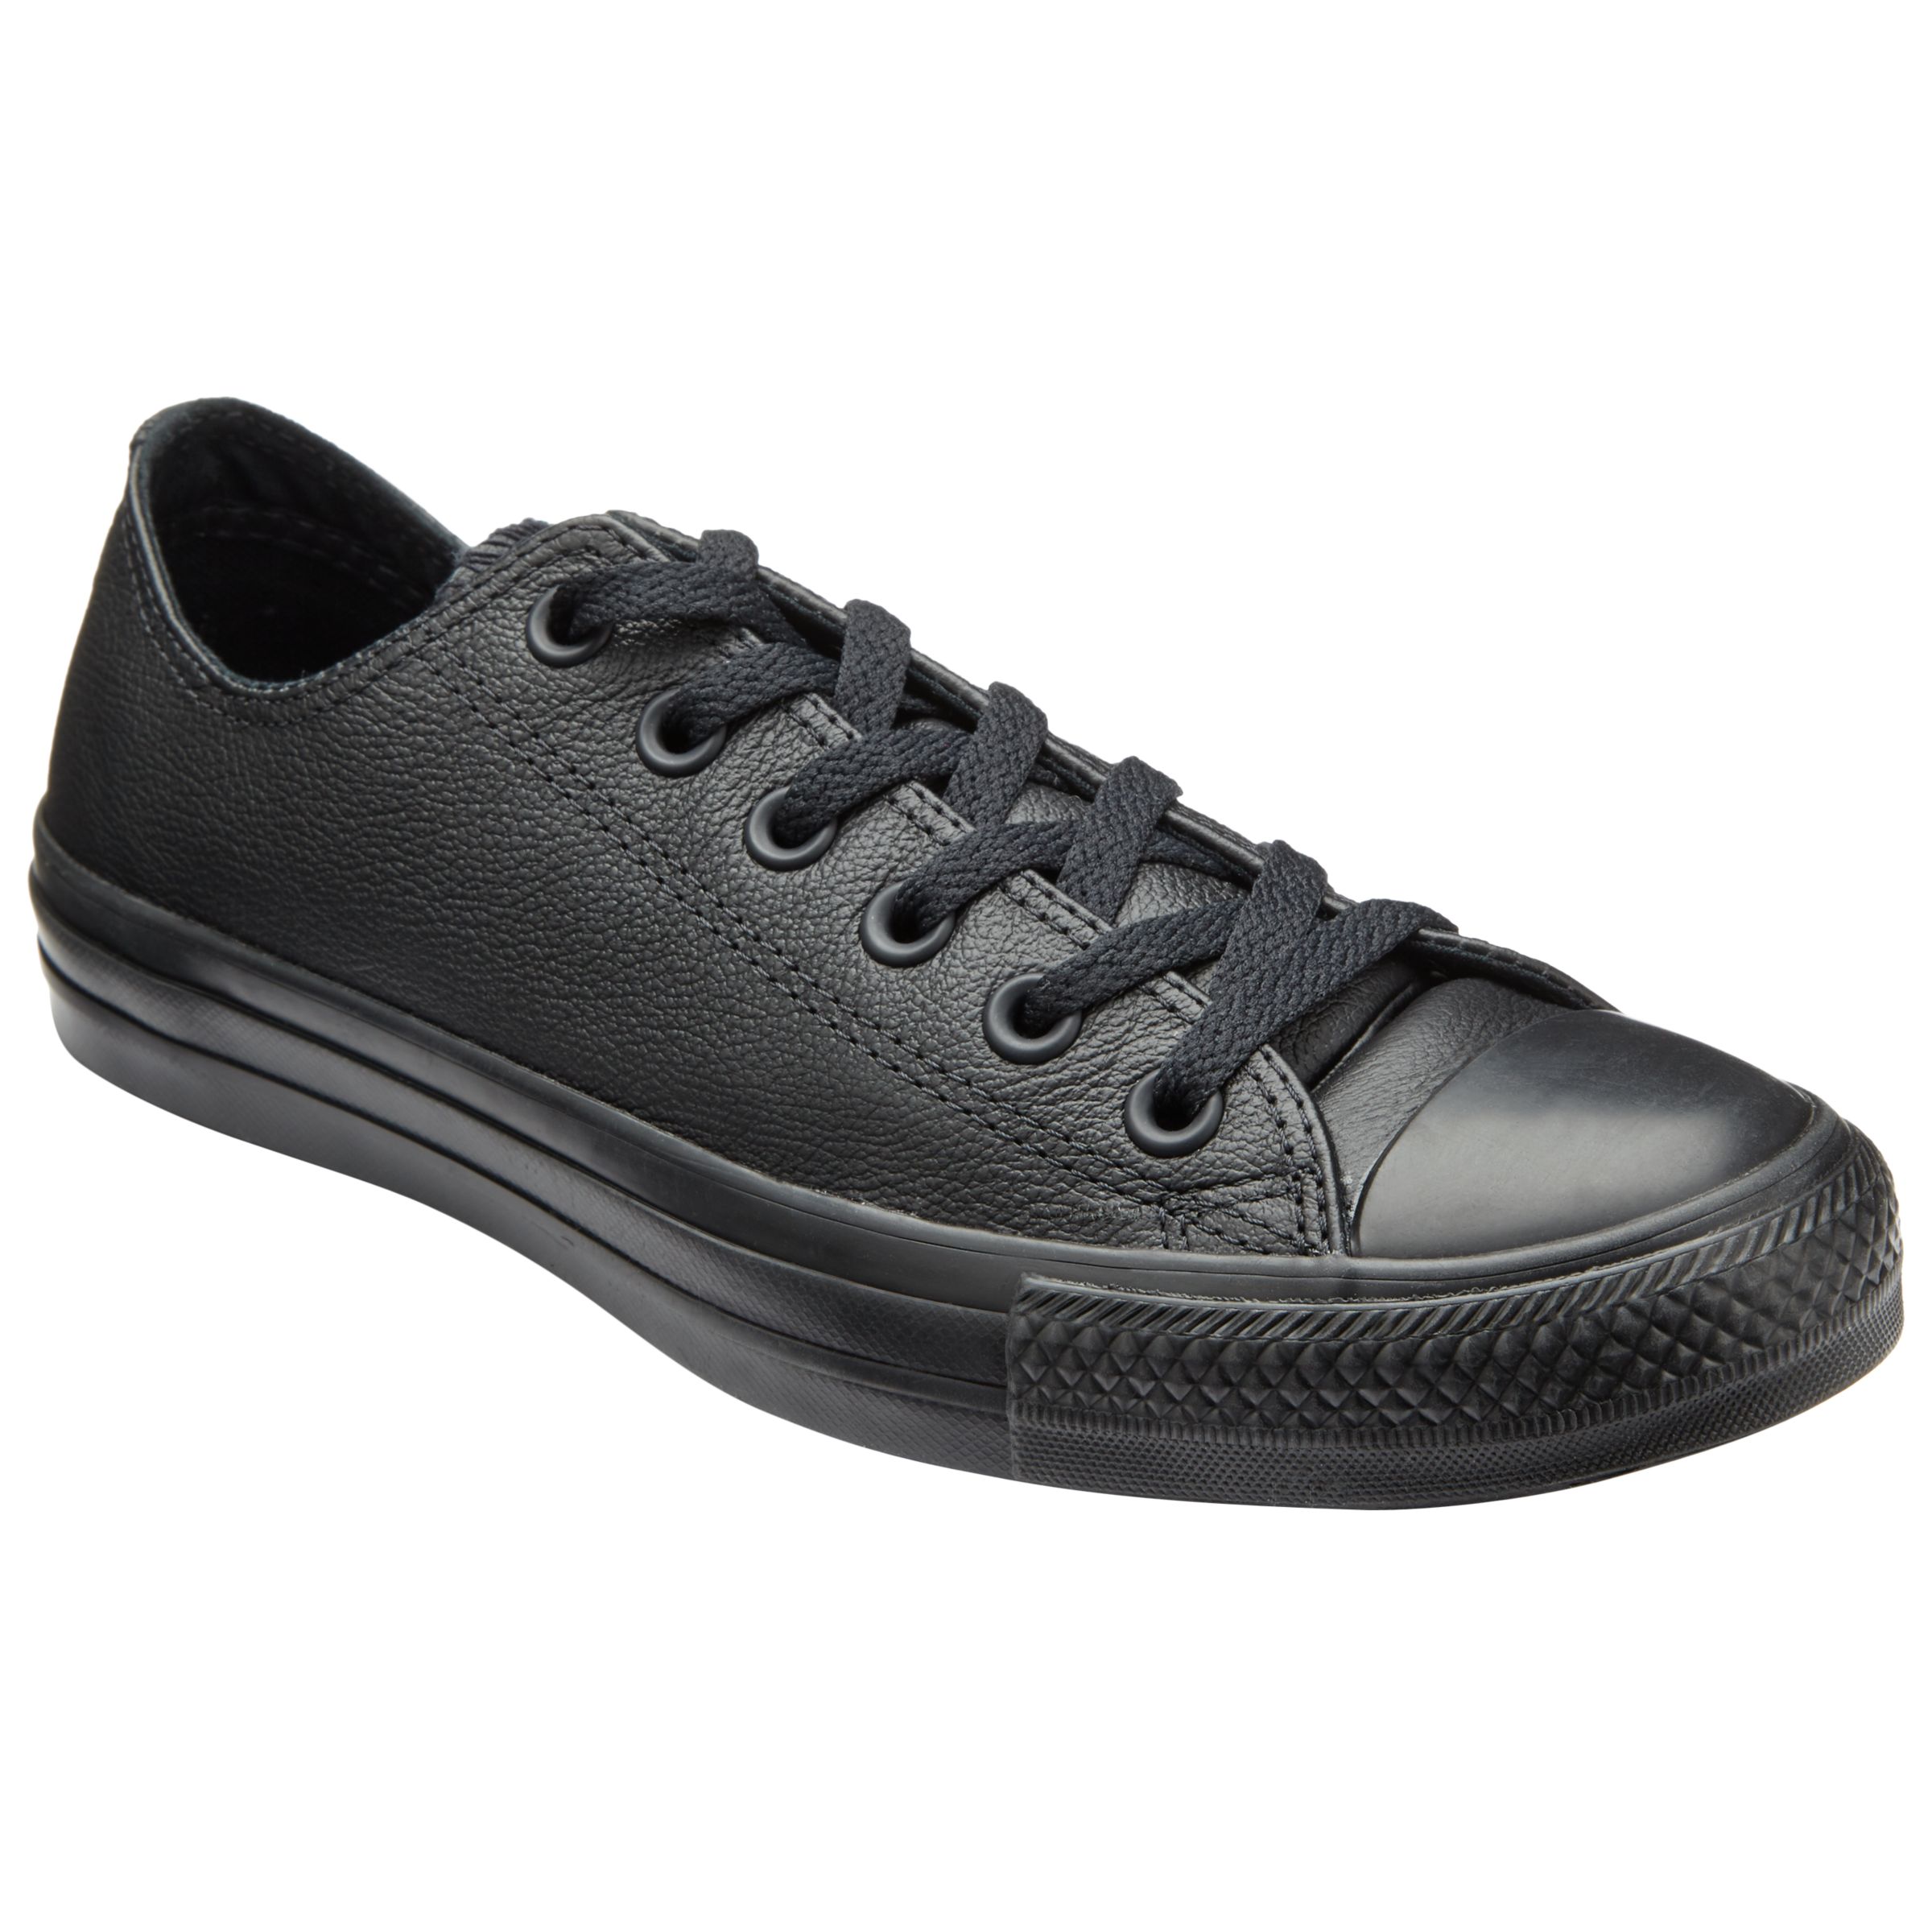 converse chuck taylor ox trainers in triple black leather